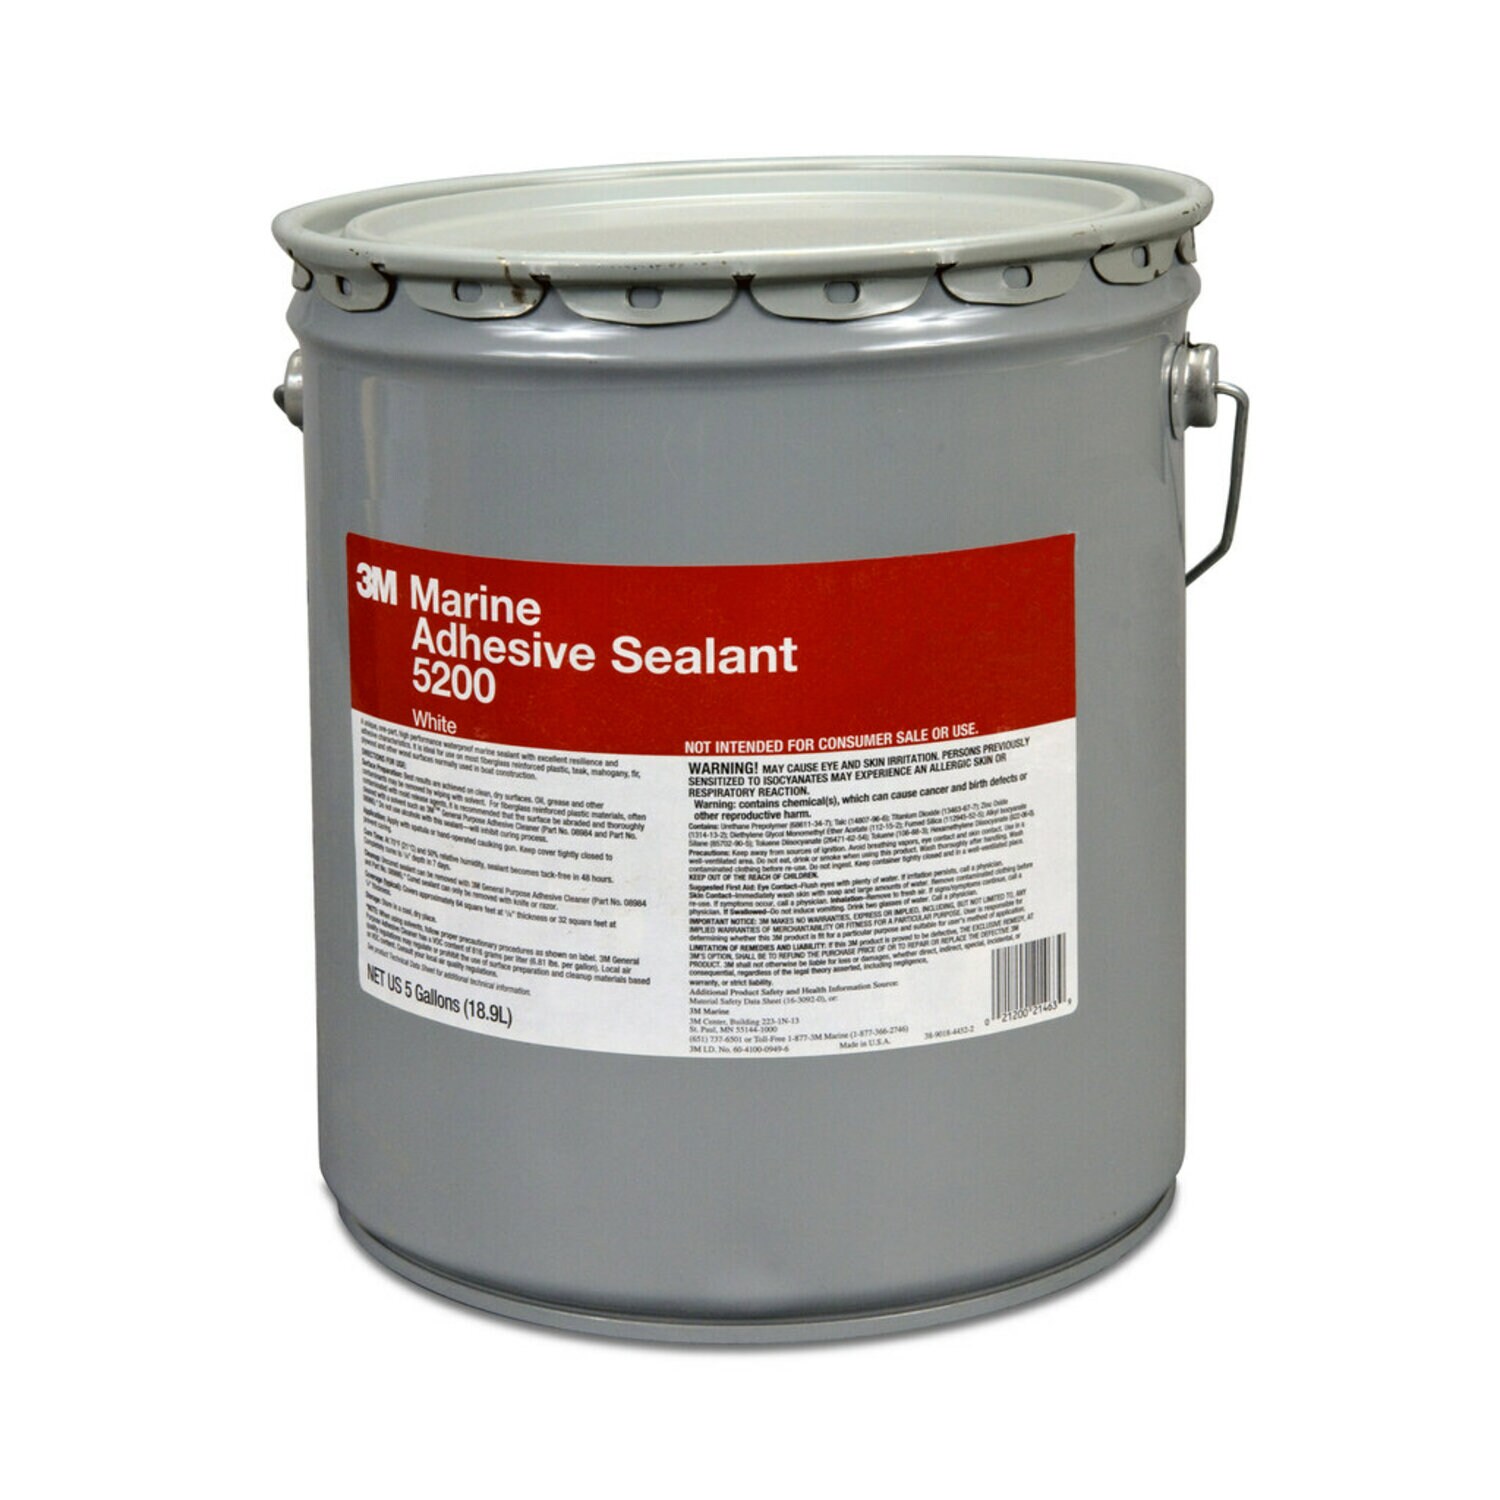 CP 91 Wax and Grease Remover, 5 GAL